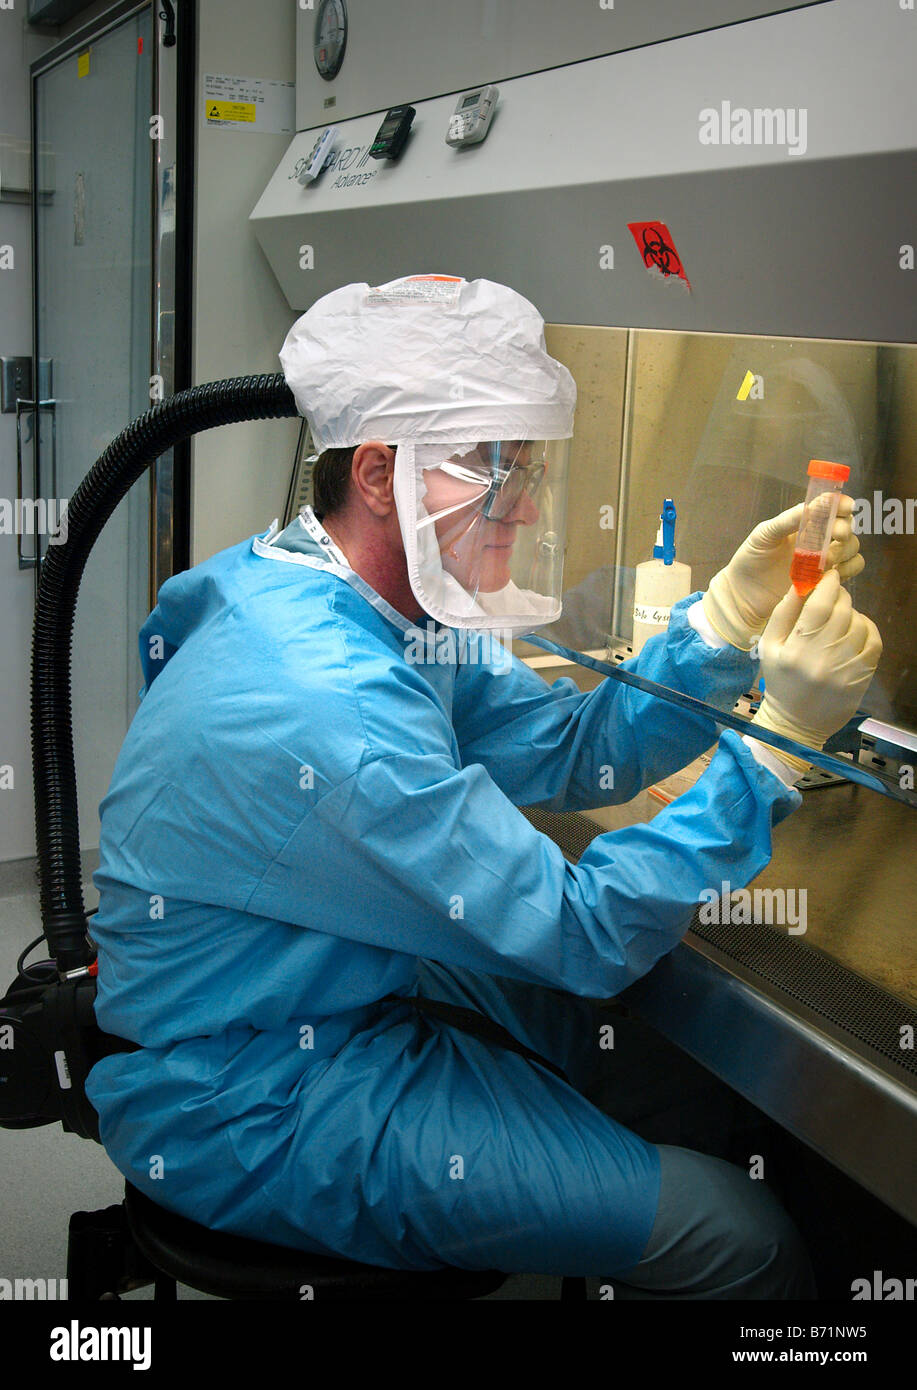 CDC Communicable Disease Center virologist Dr. Tumpey working in a ventilation hood with viruses Stock Photo